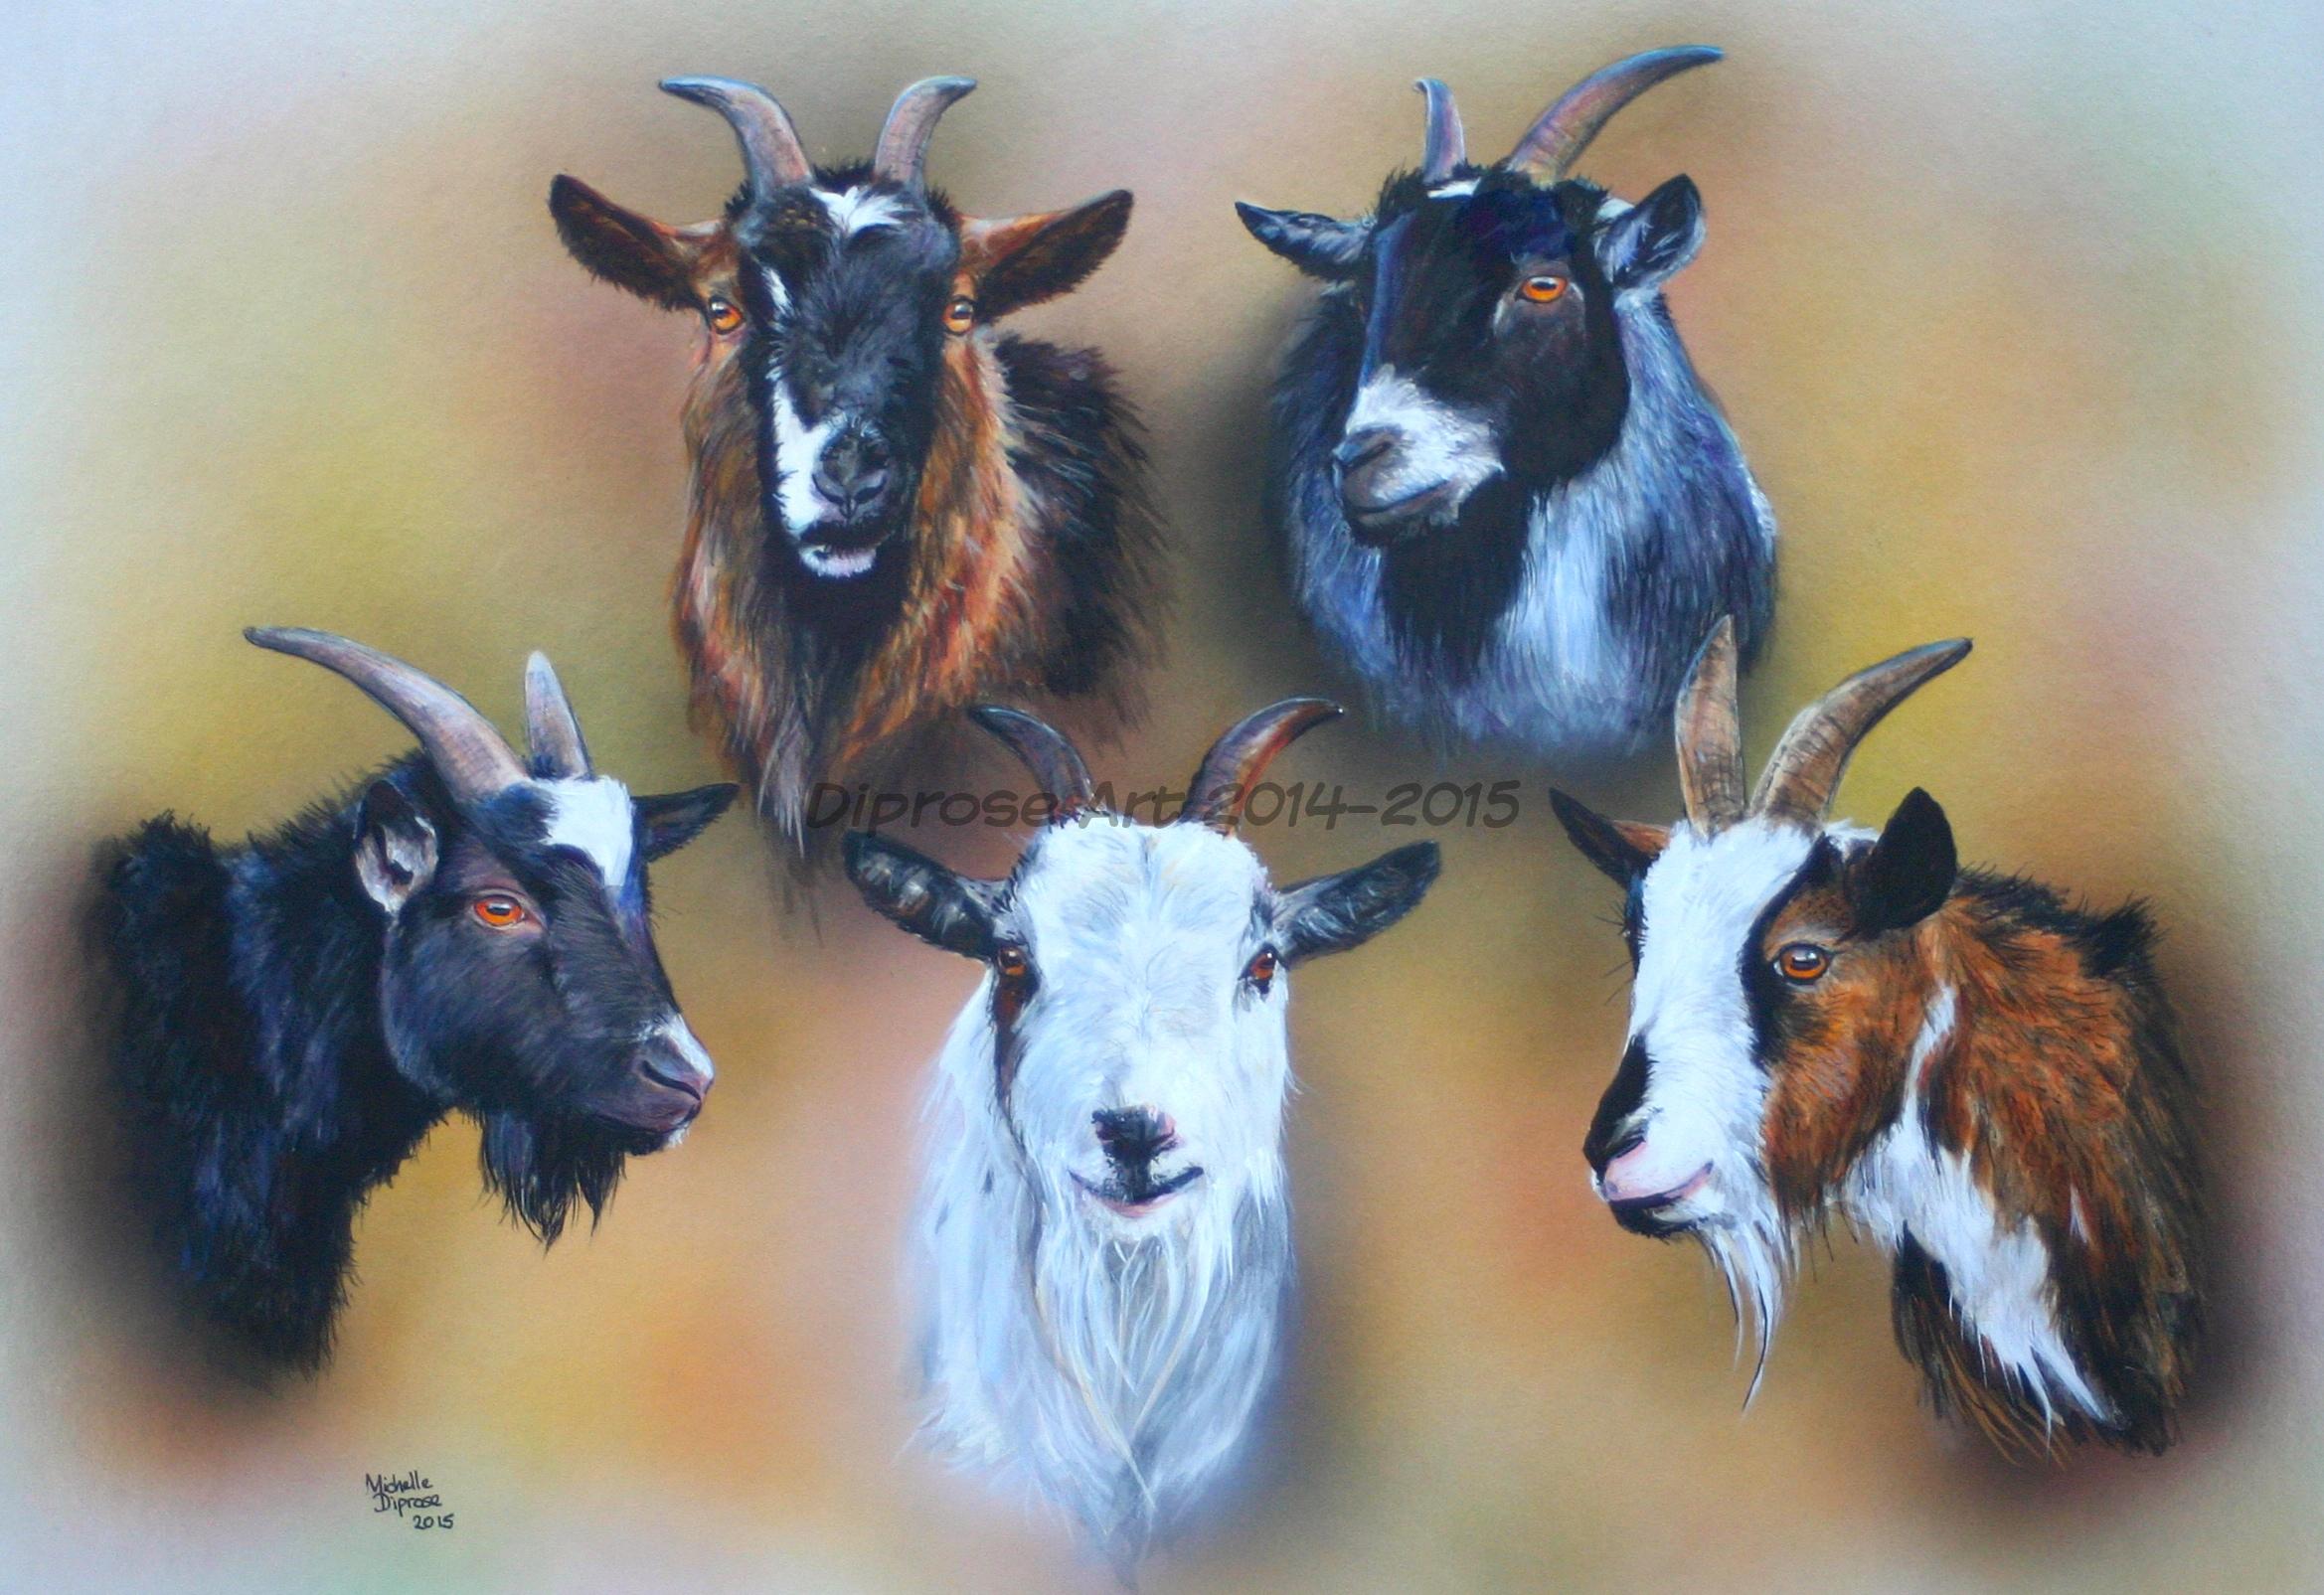 Acrylics on board - approx A2 - pygmy goat portraits - all these girls are very different!  1st time I have painted goats - get fun